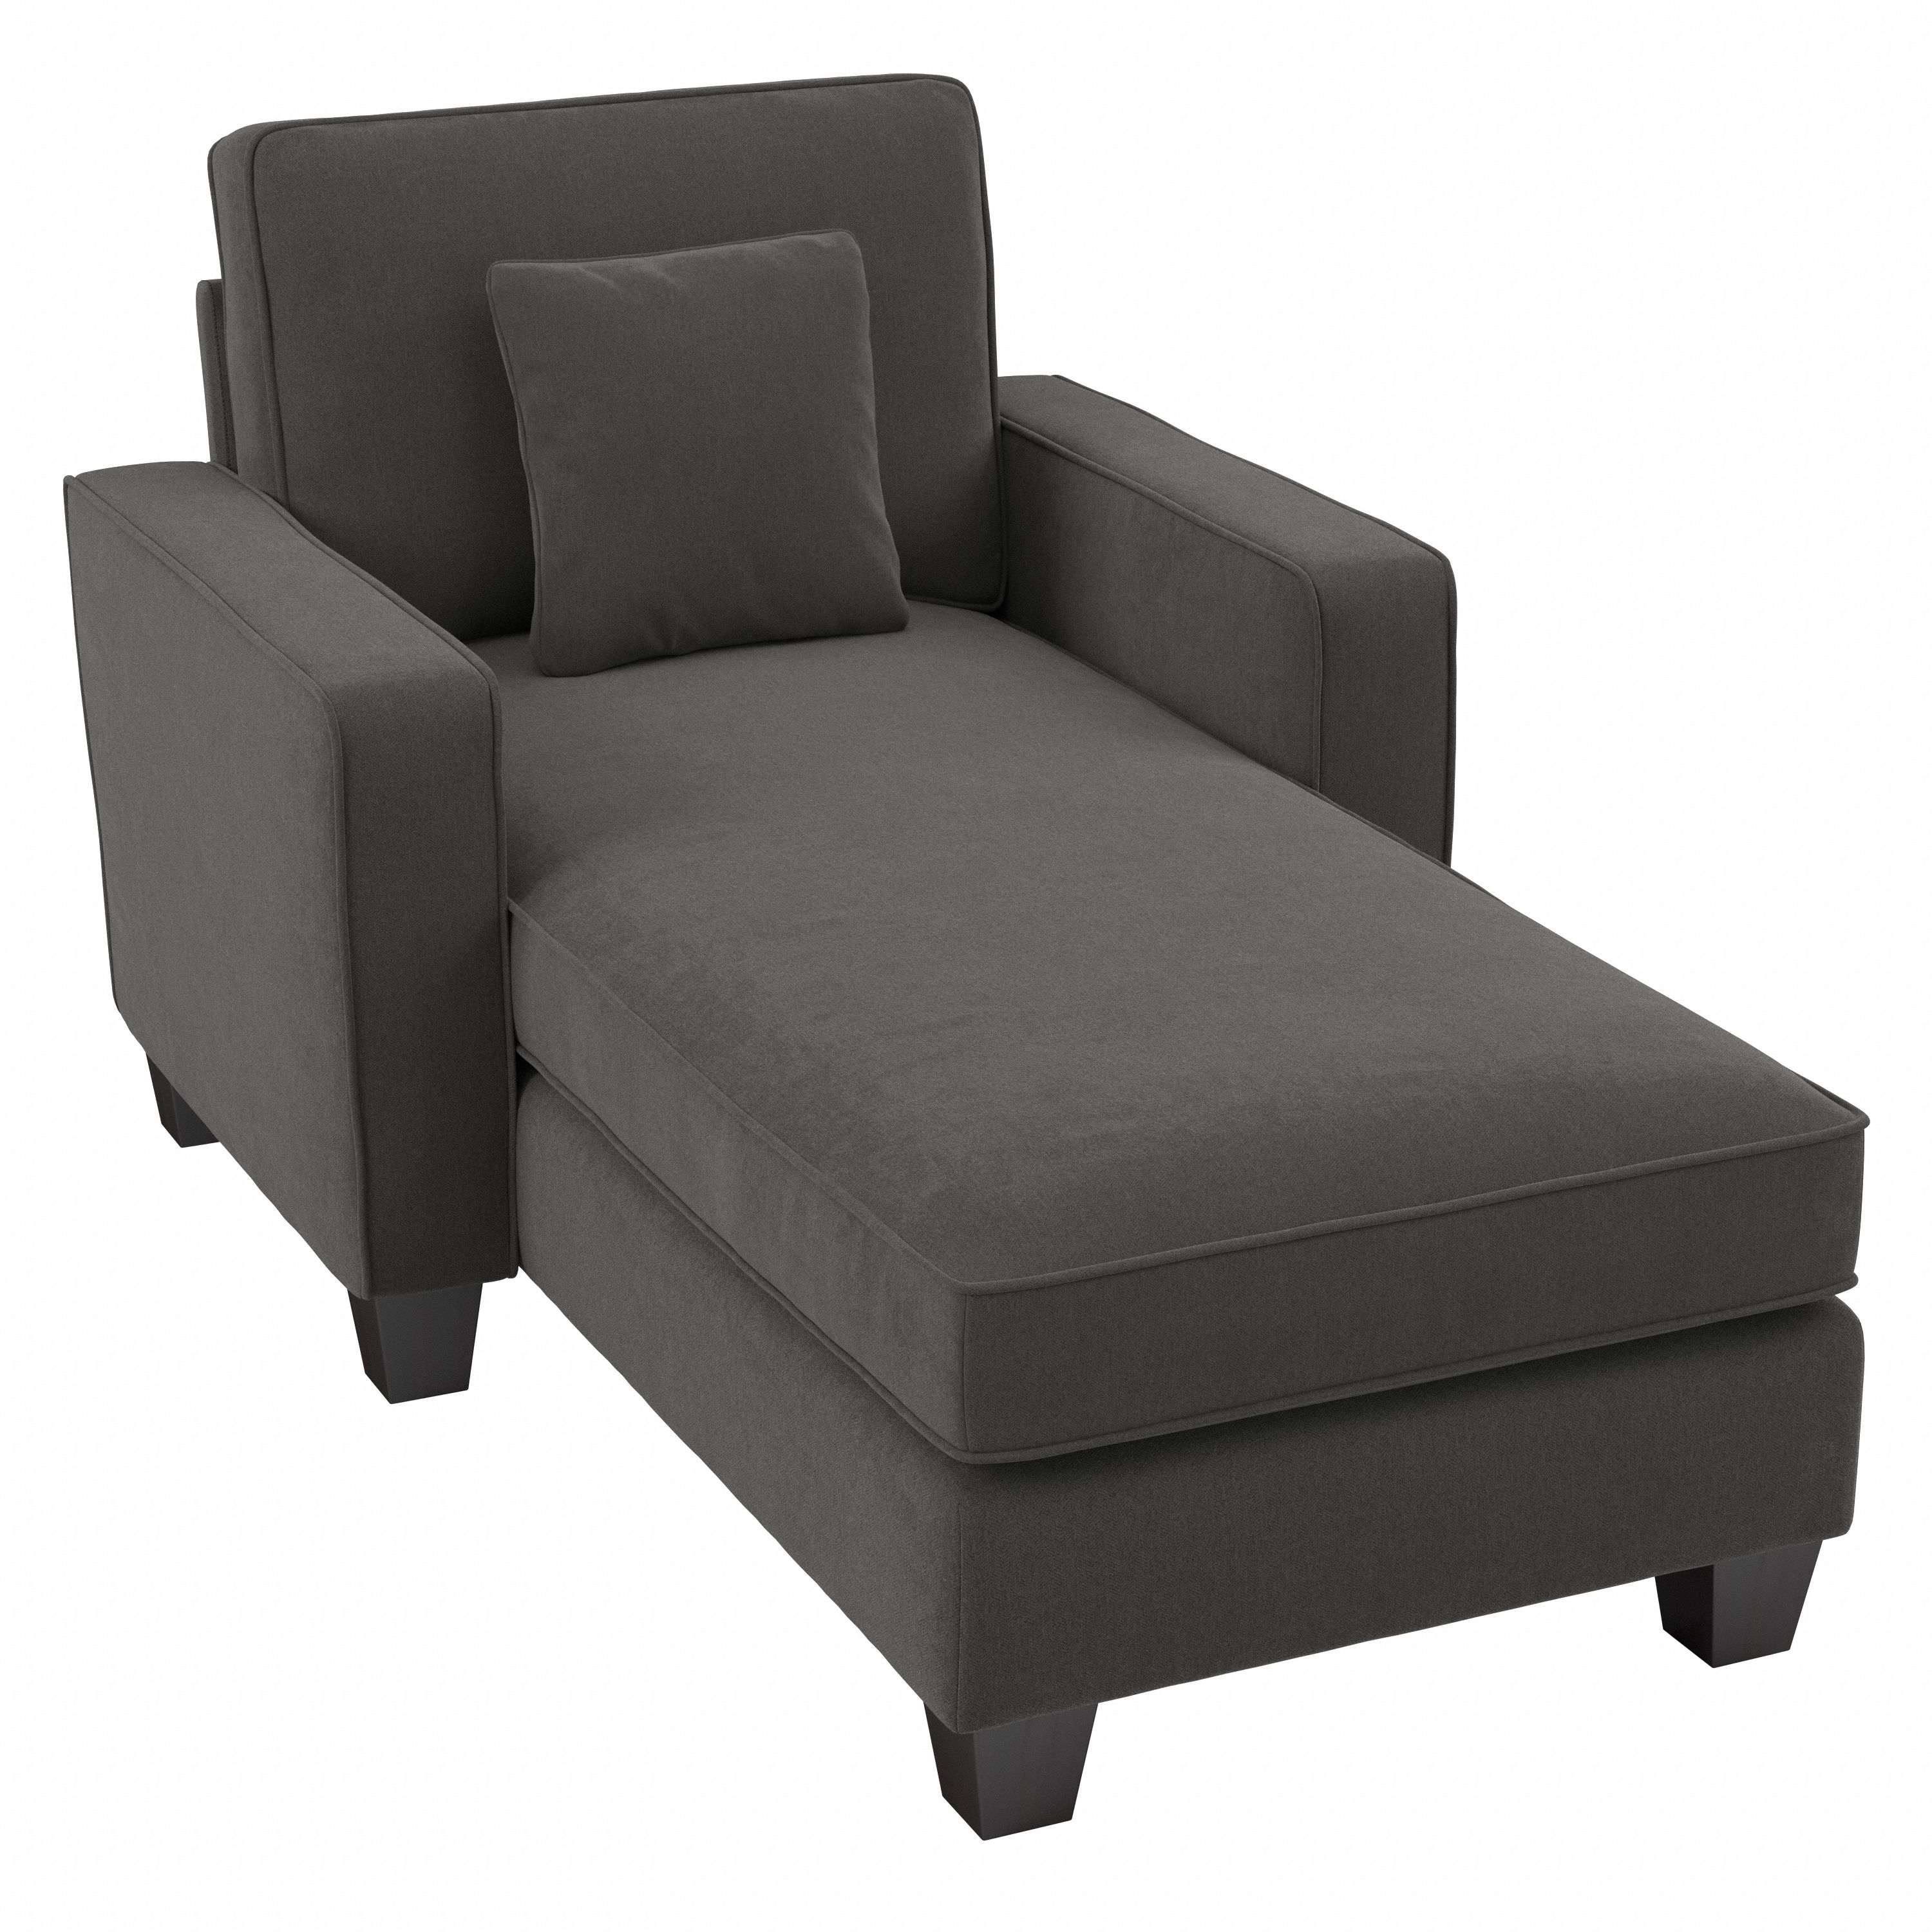 Shop Bush Furniture Stockton Chaise Lounge with Arms 02 SNM41SCGH-03K #color_charcoal gray herringbone fabr